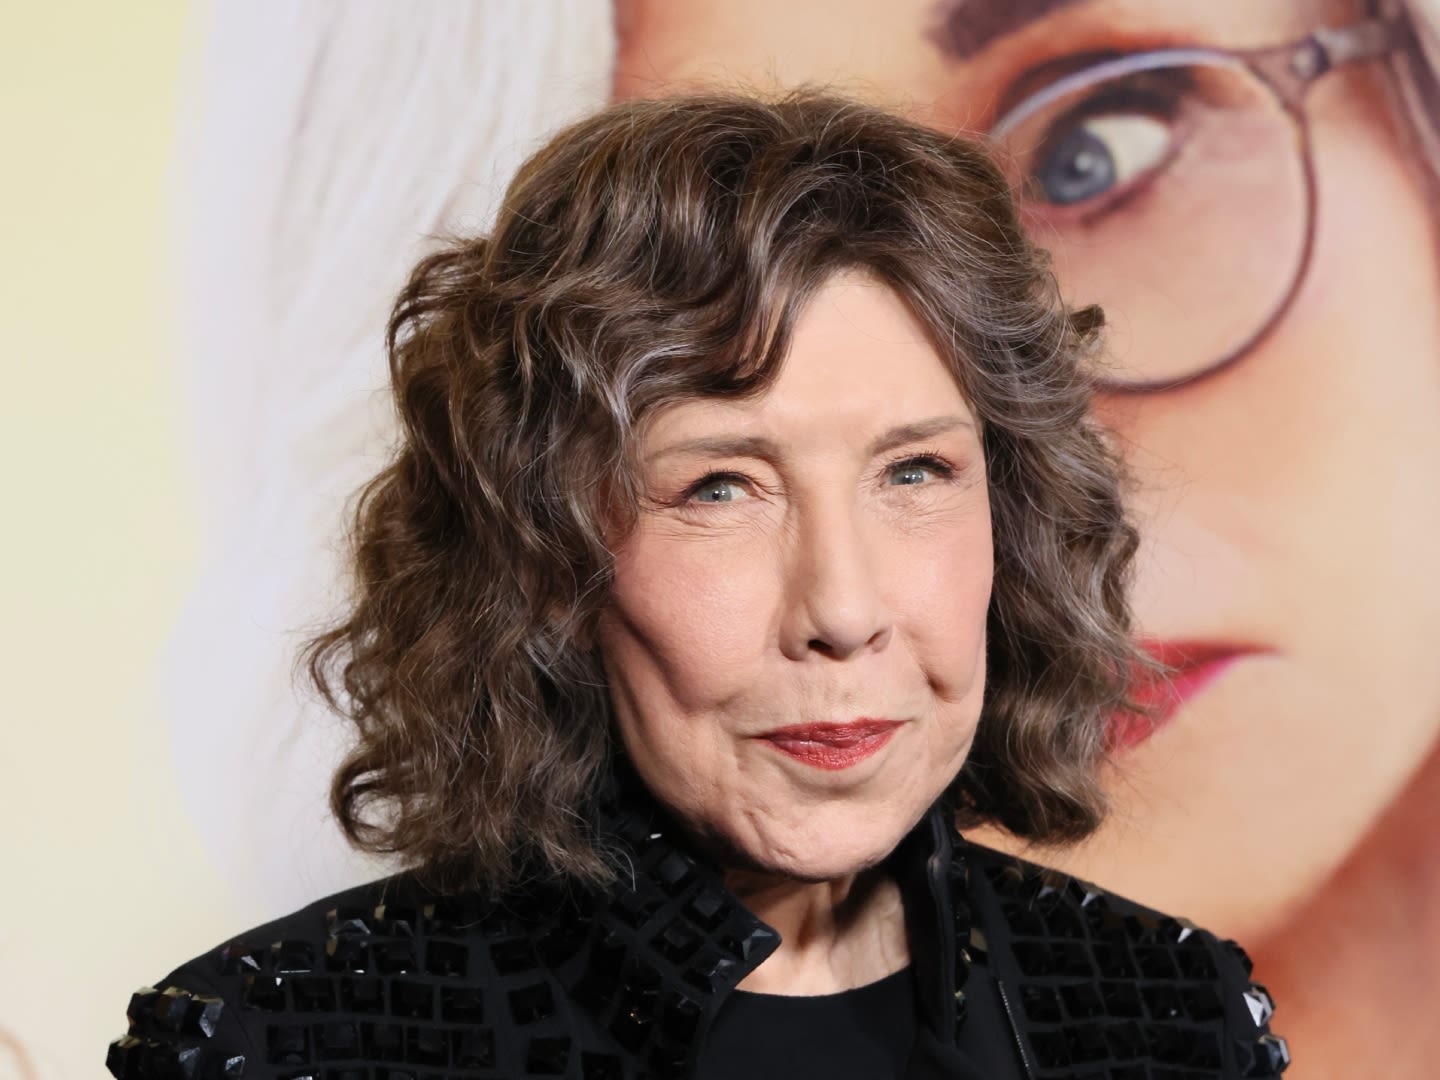 Lily Tomlin Used This Tightening ‘Face Lift in a Bottle’ Cream on the Set of ‘Grace & Frankie’